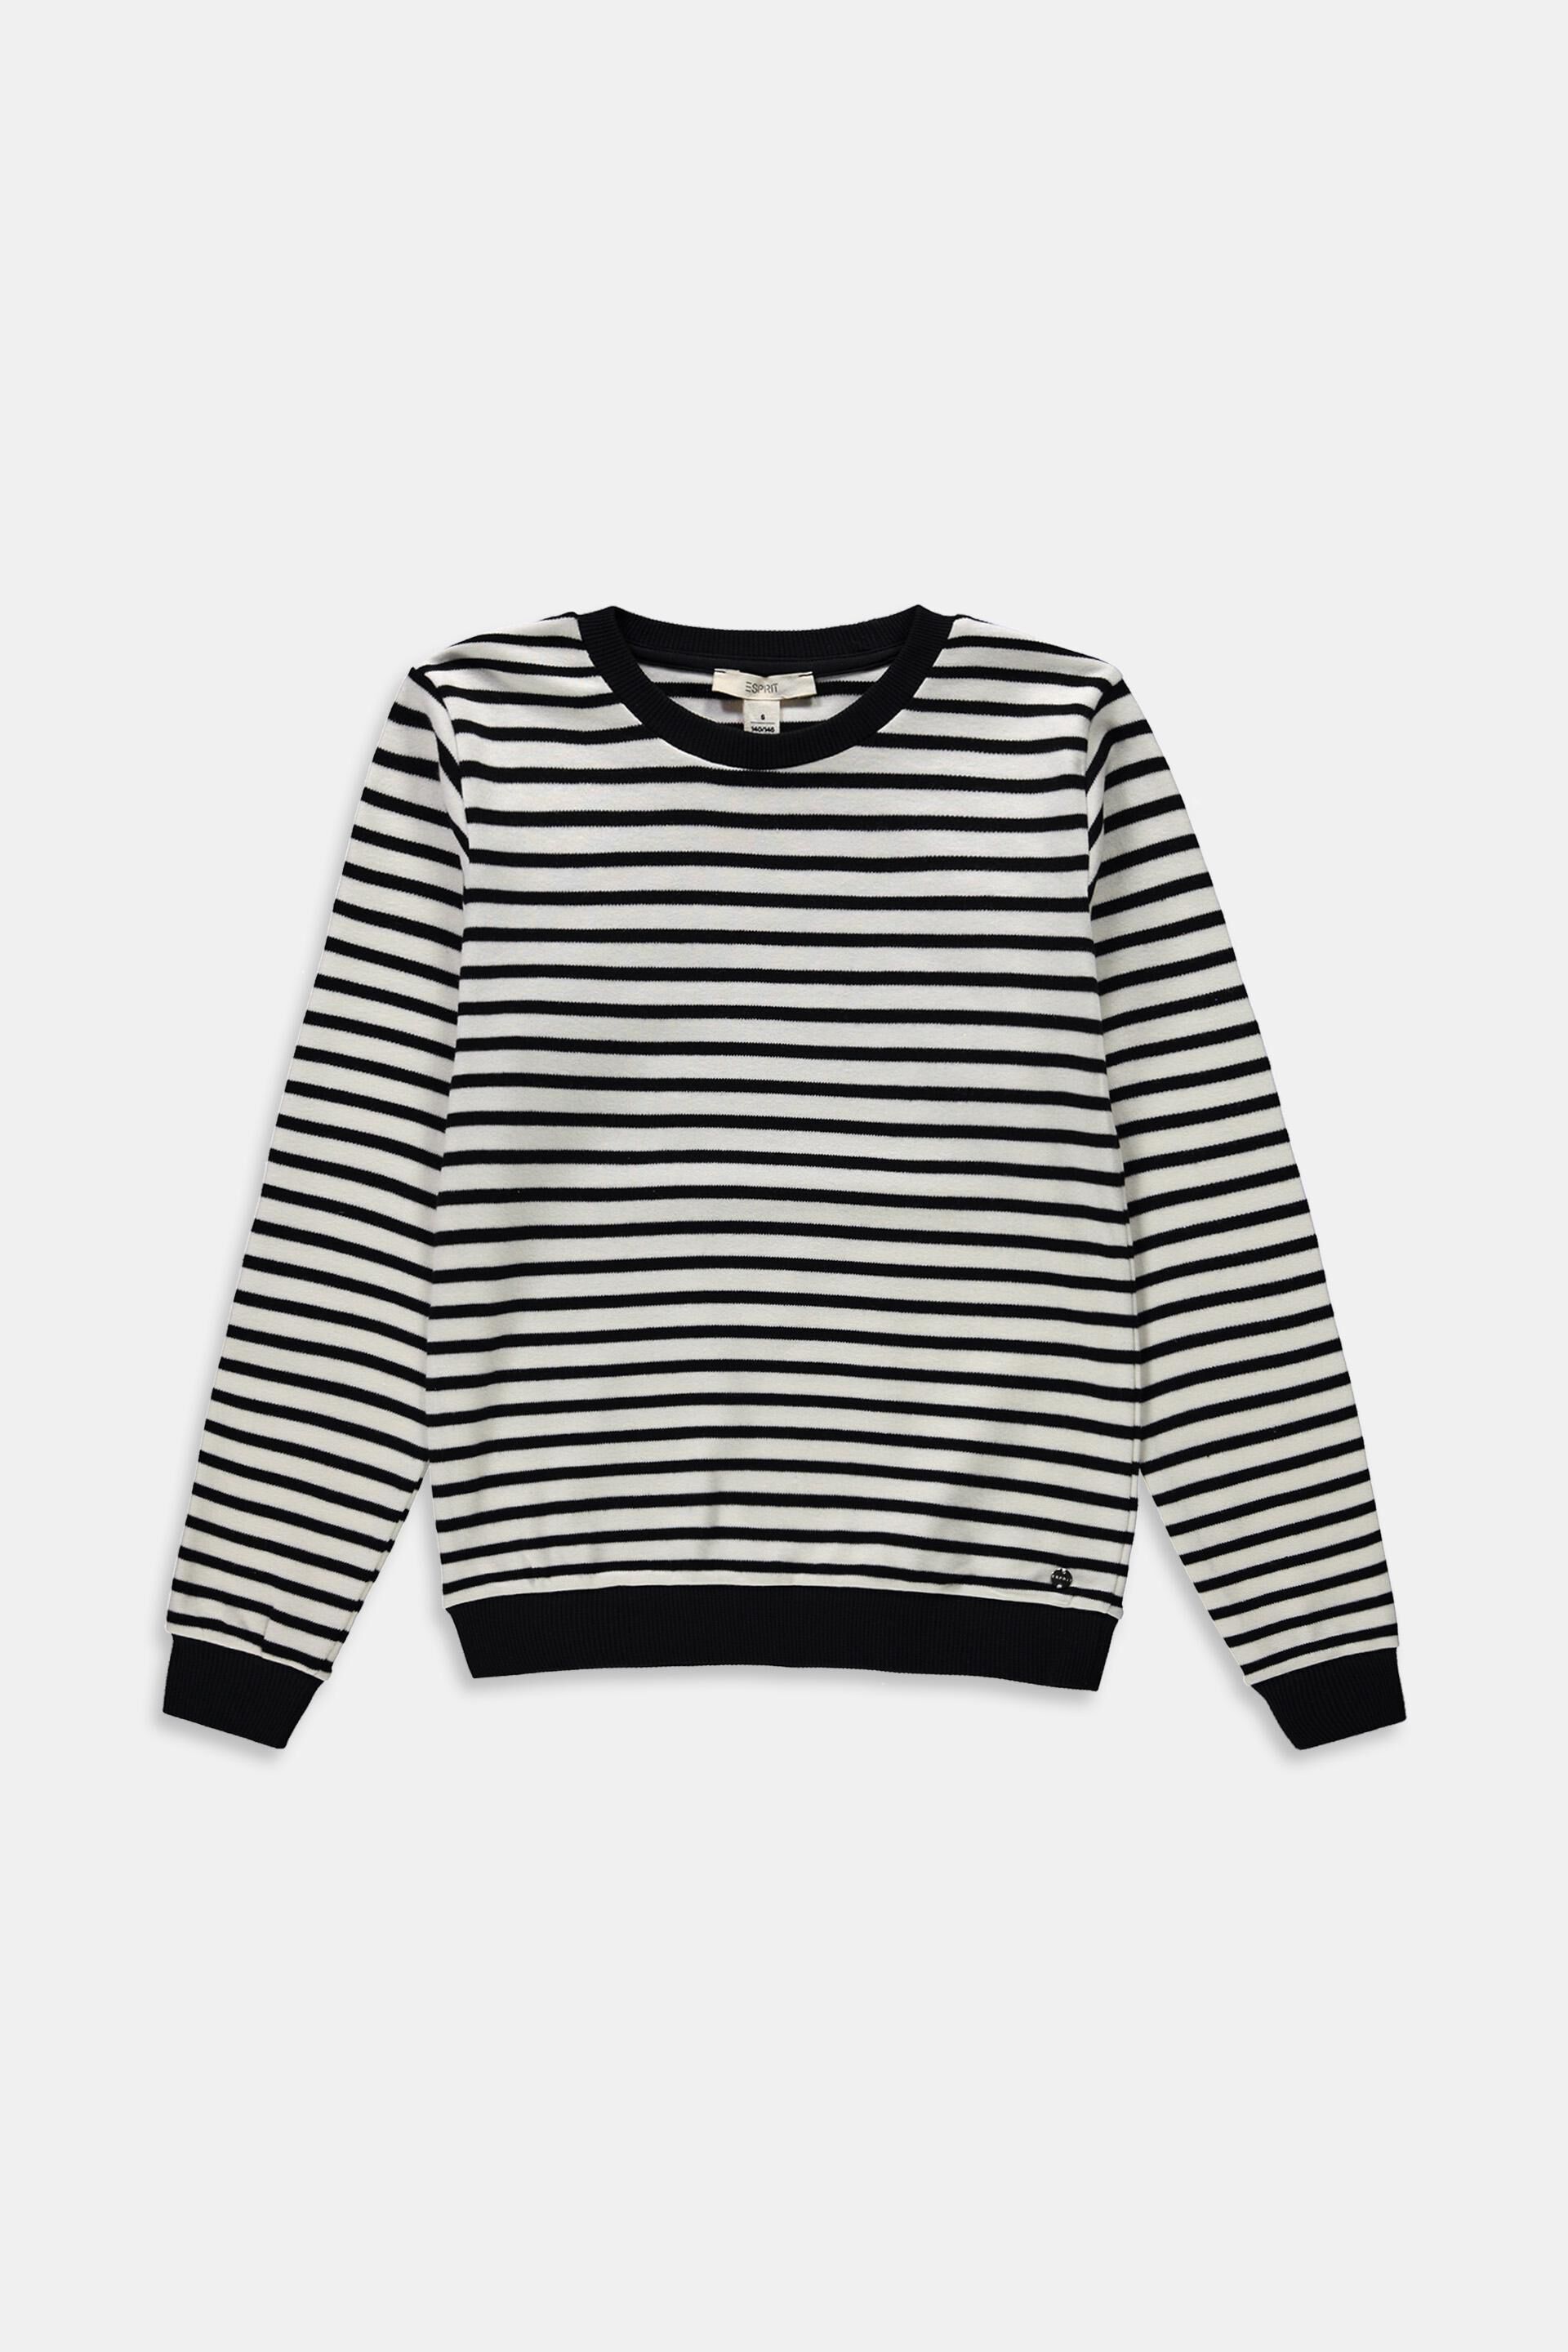 Esprit Striped long-sleeved top